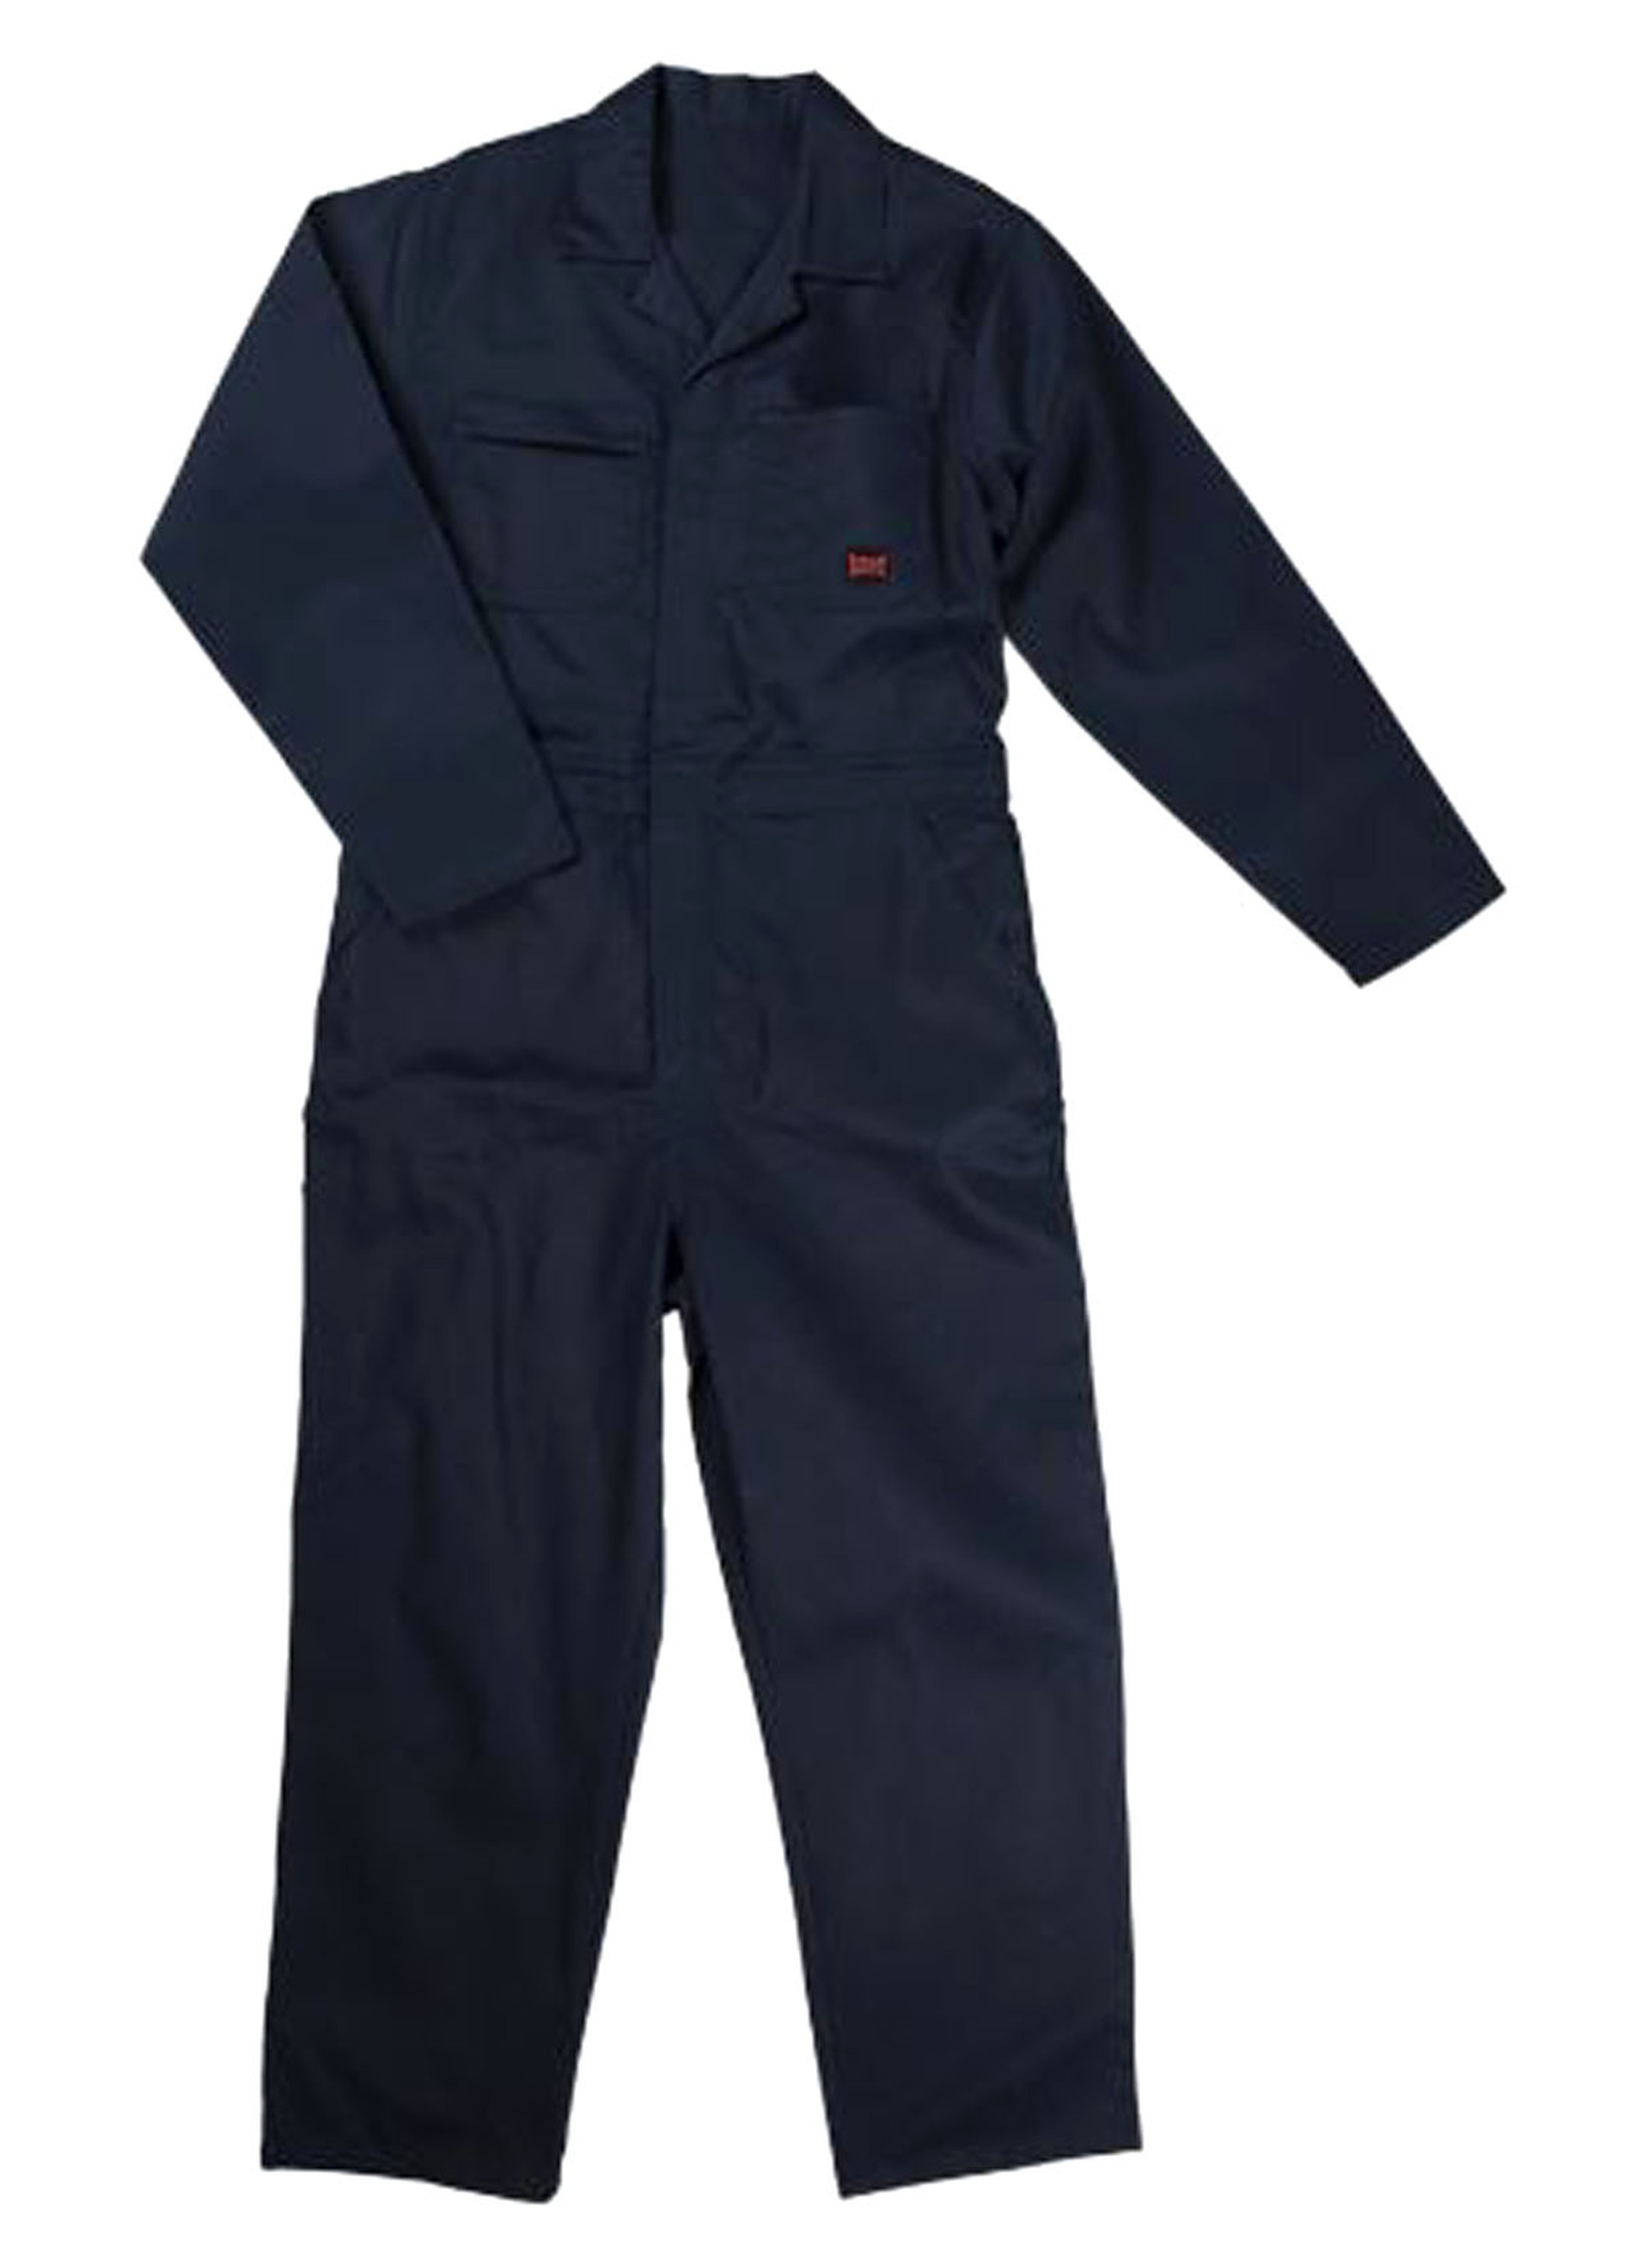 Unlined Coverall (Navy) - 2 Pack